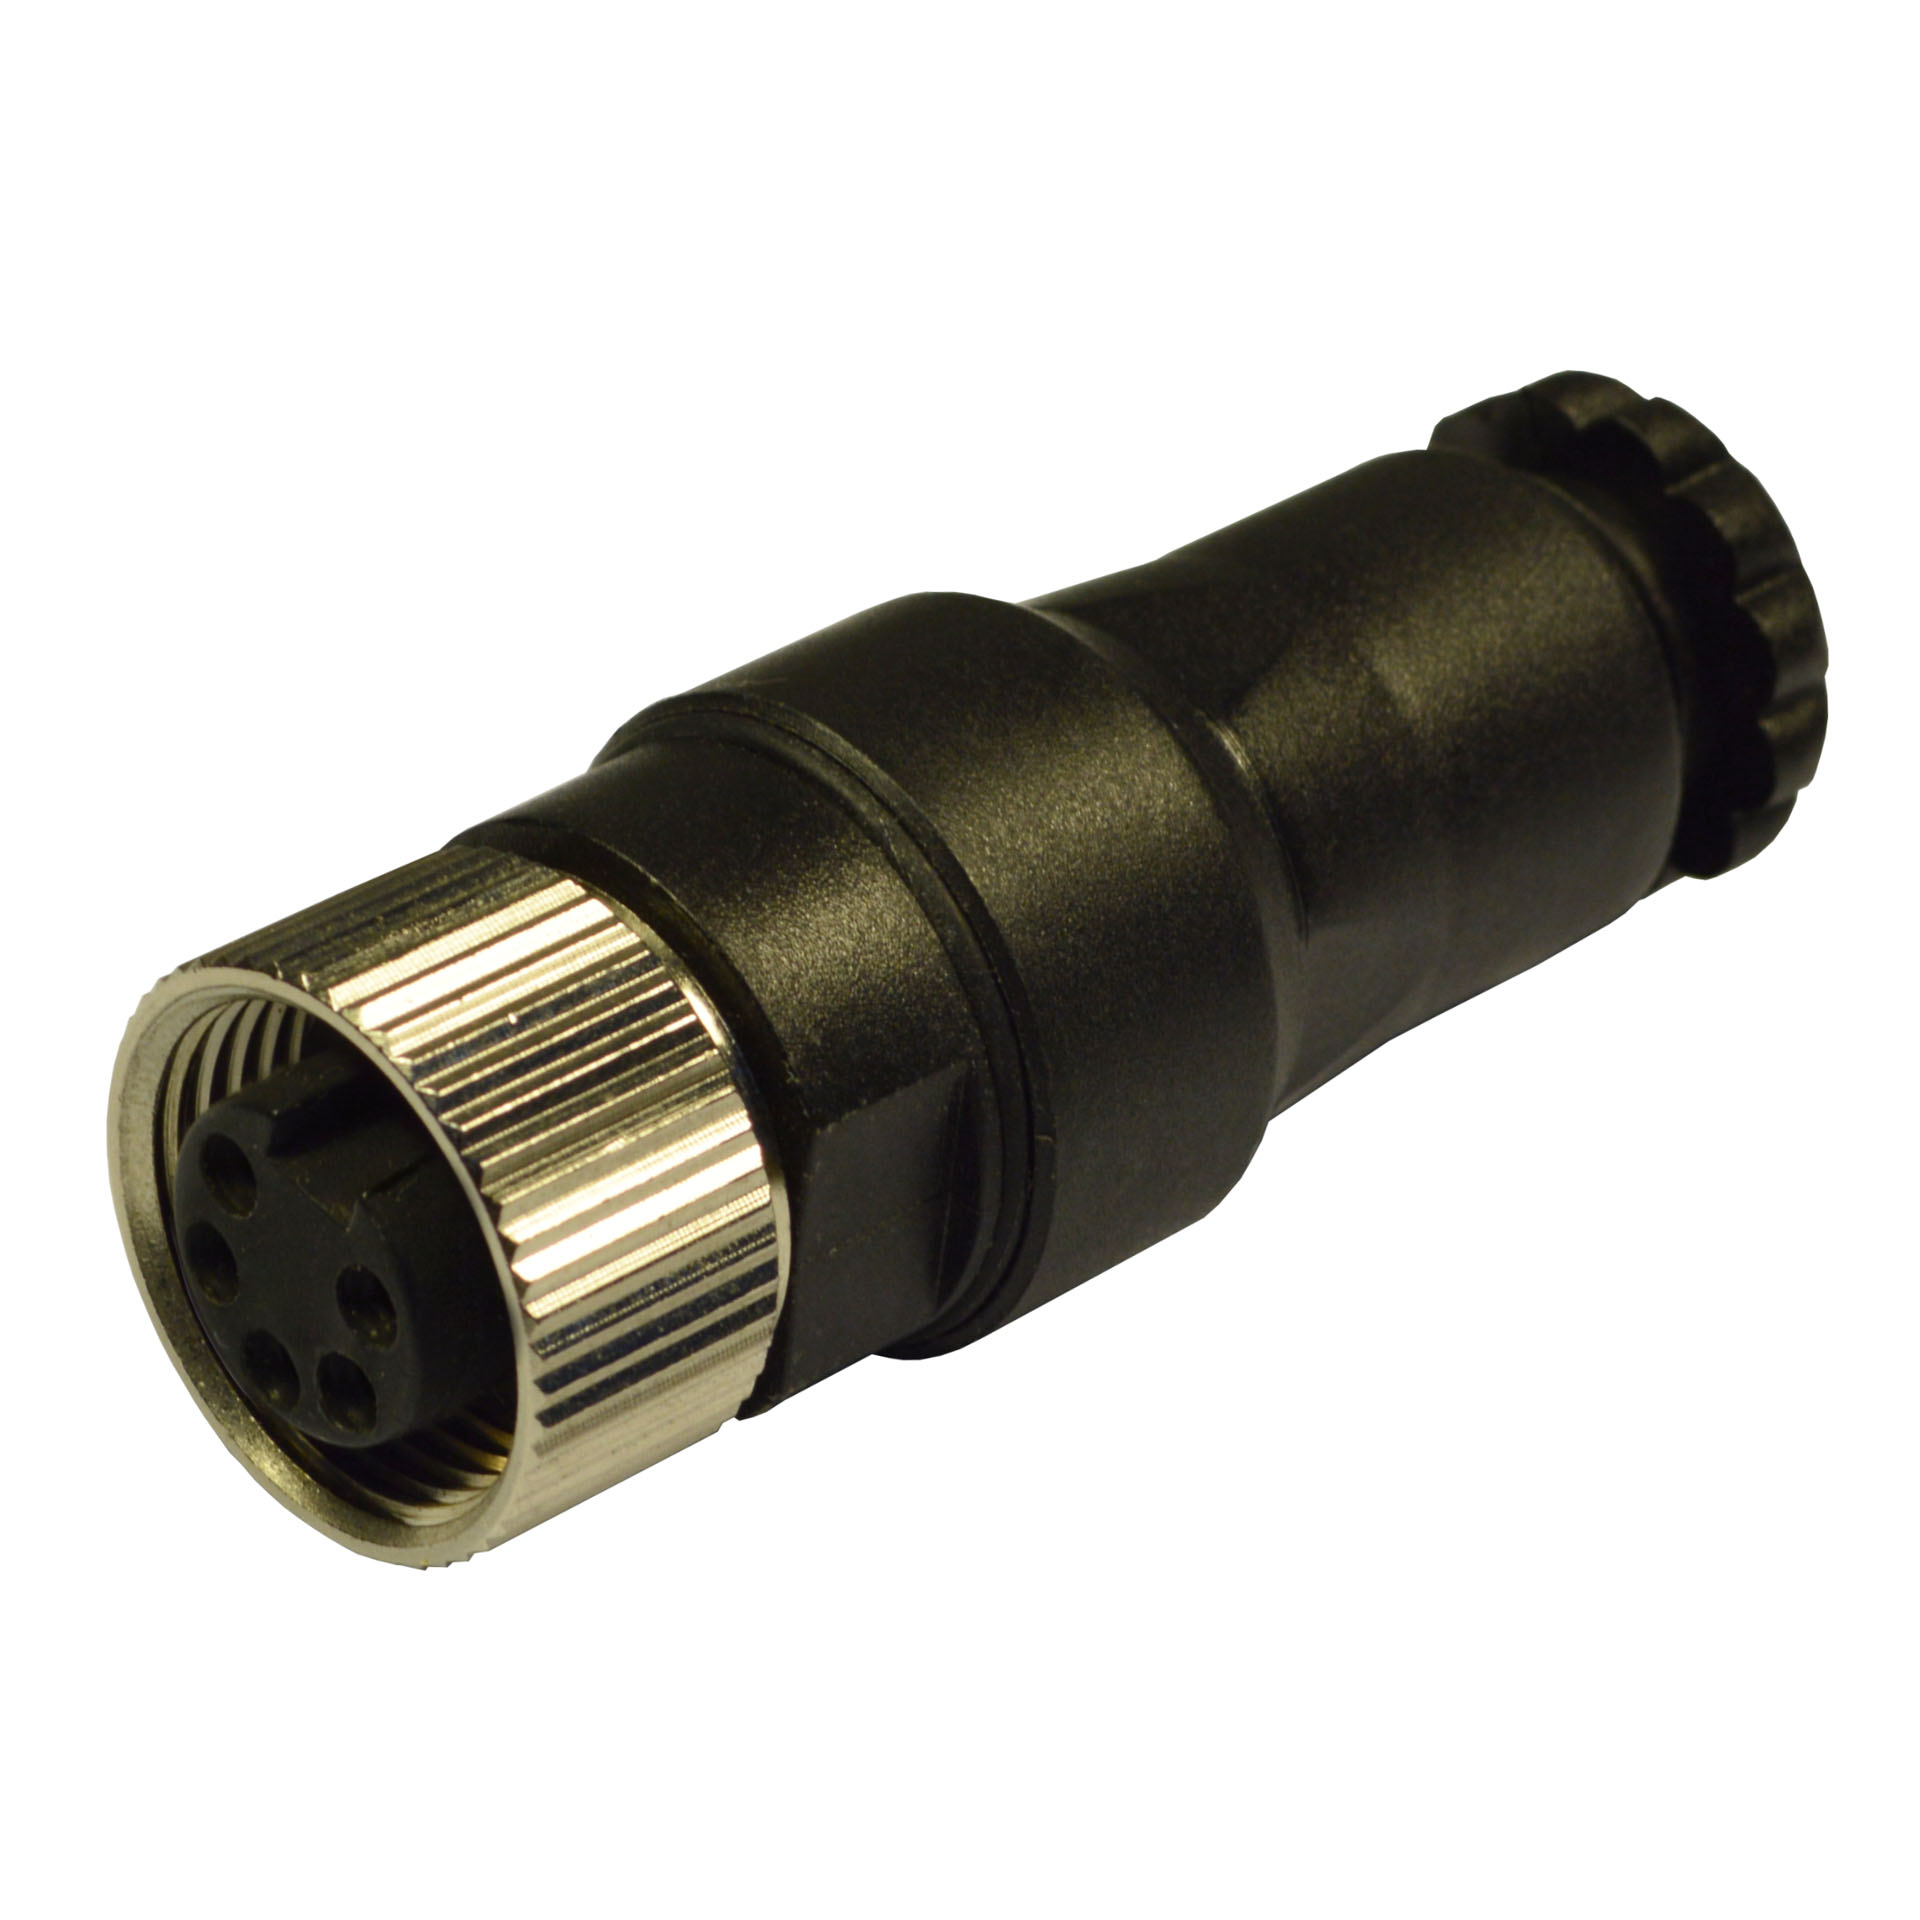 7/8" field attachable,female,180°,5p.,PG9/11unified